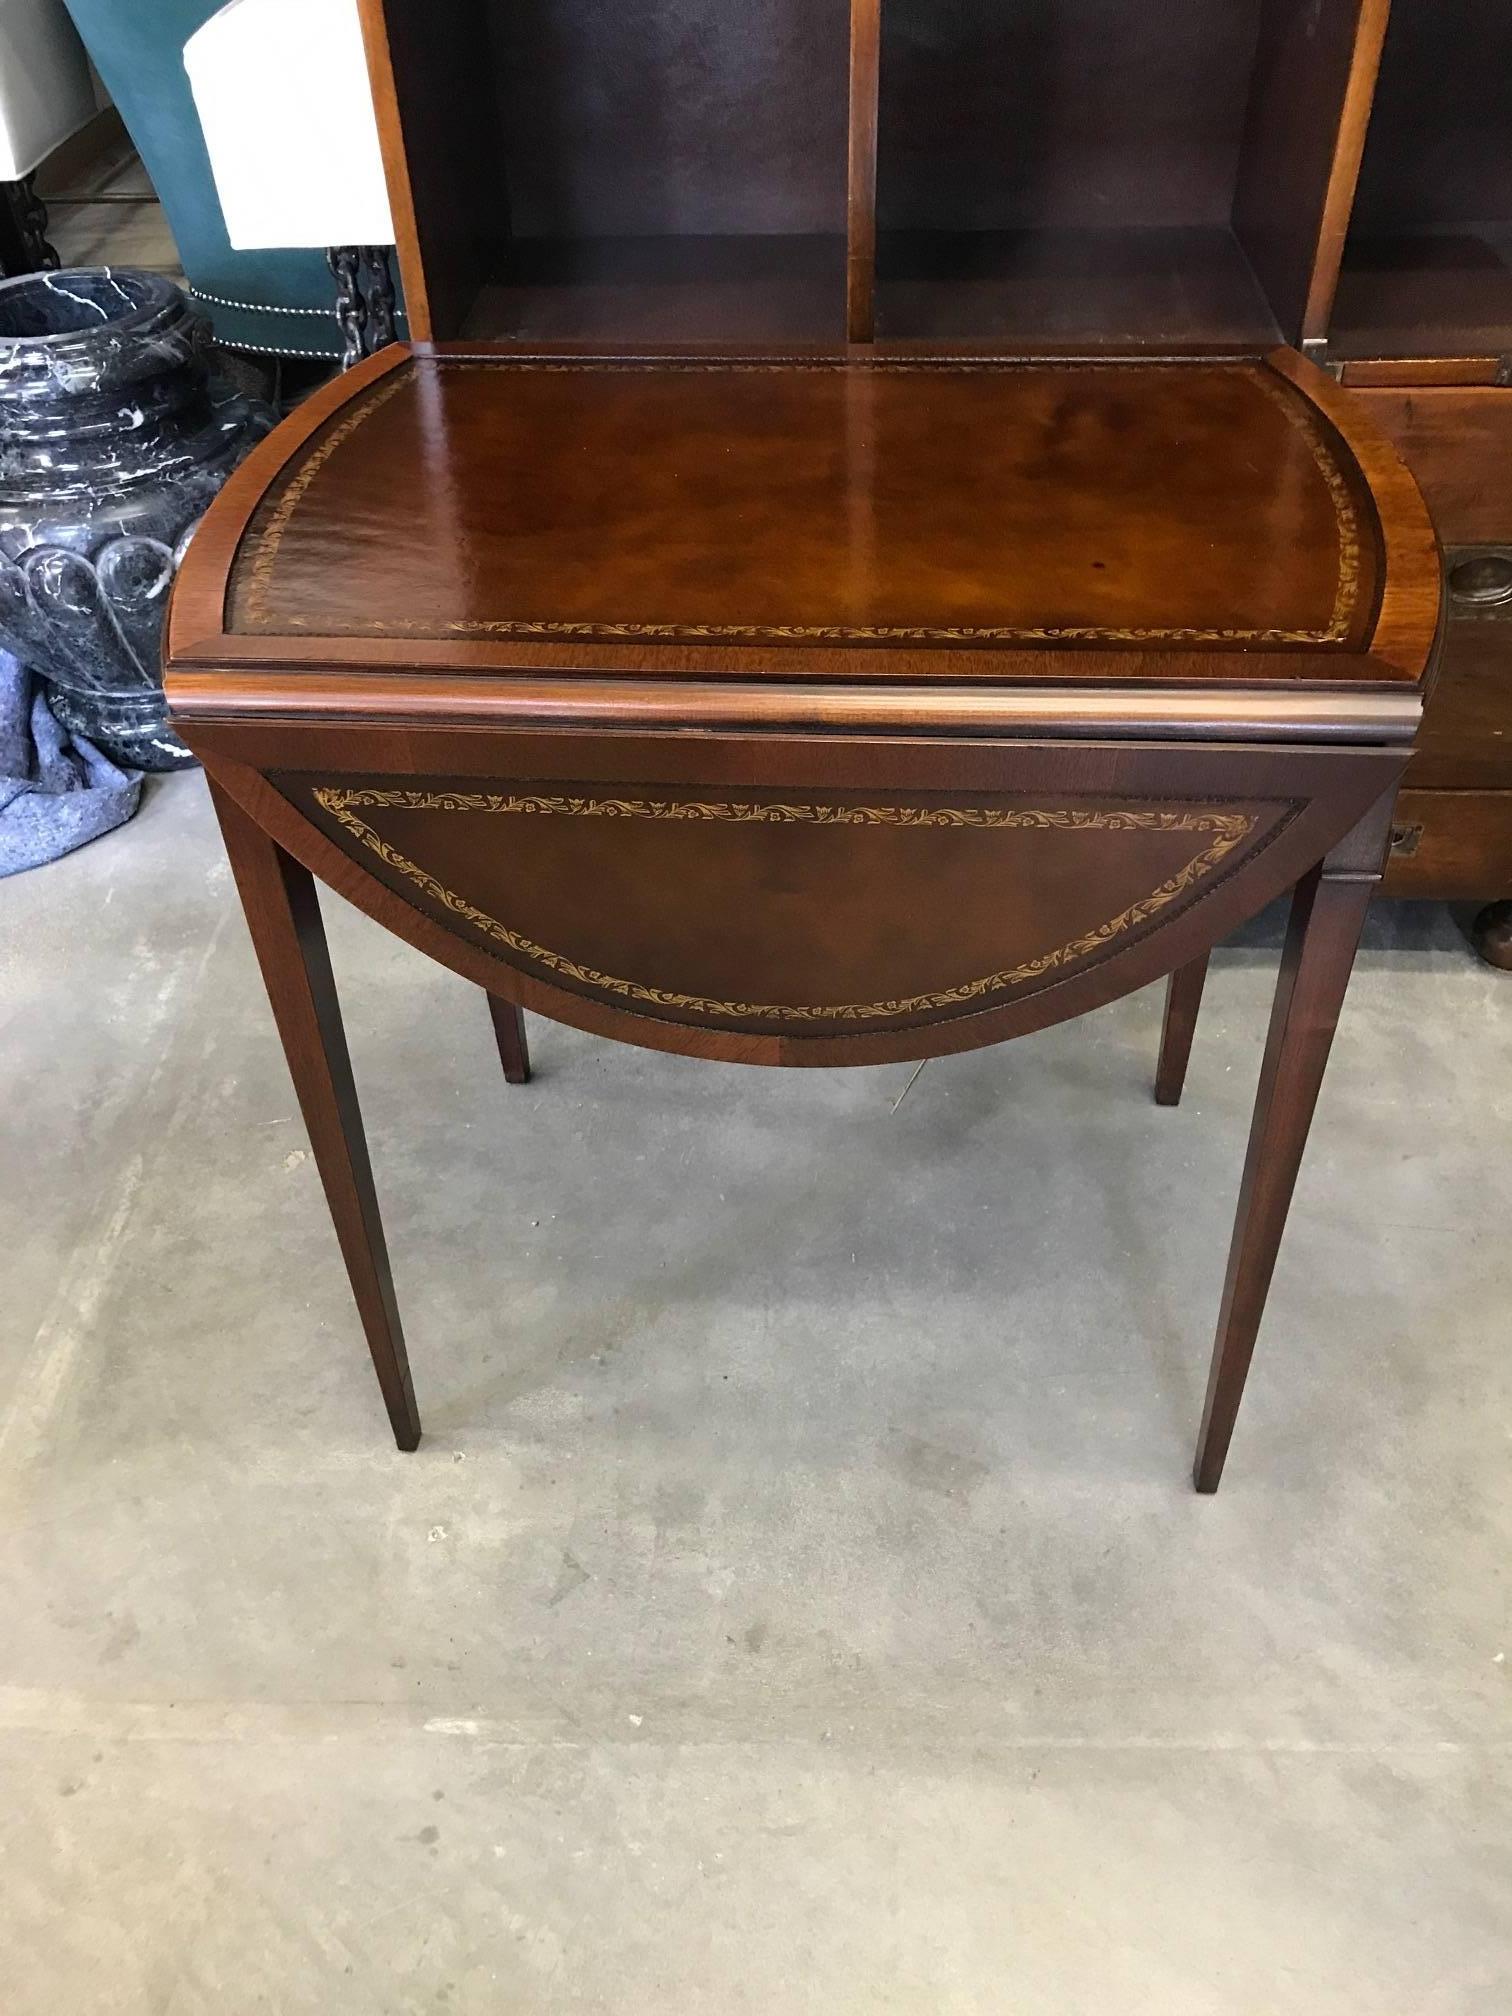 Hepplewhite Pair of Pembroke Leather Topped Mahogany Tables